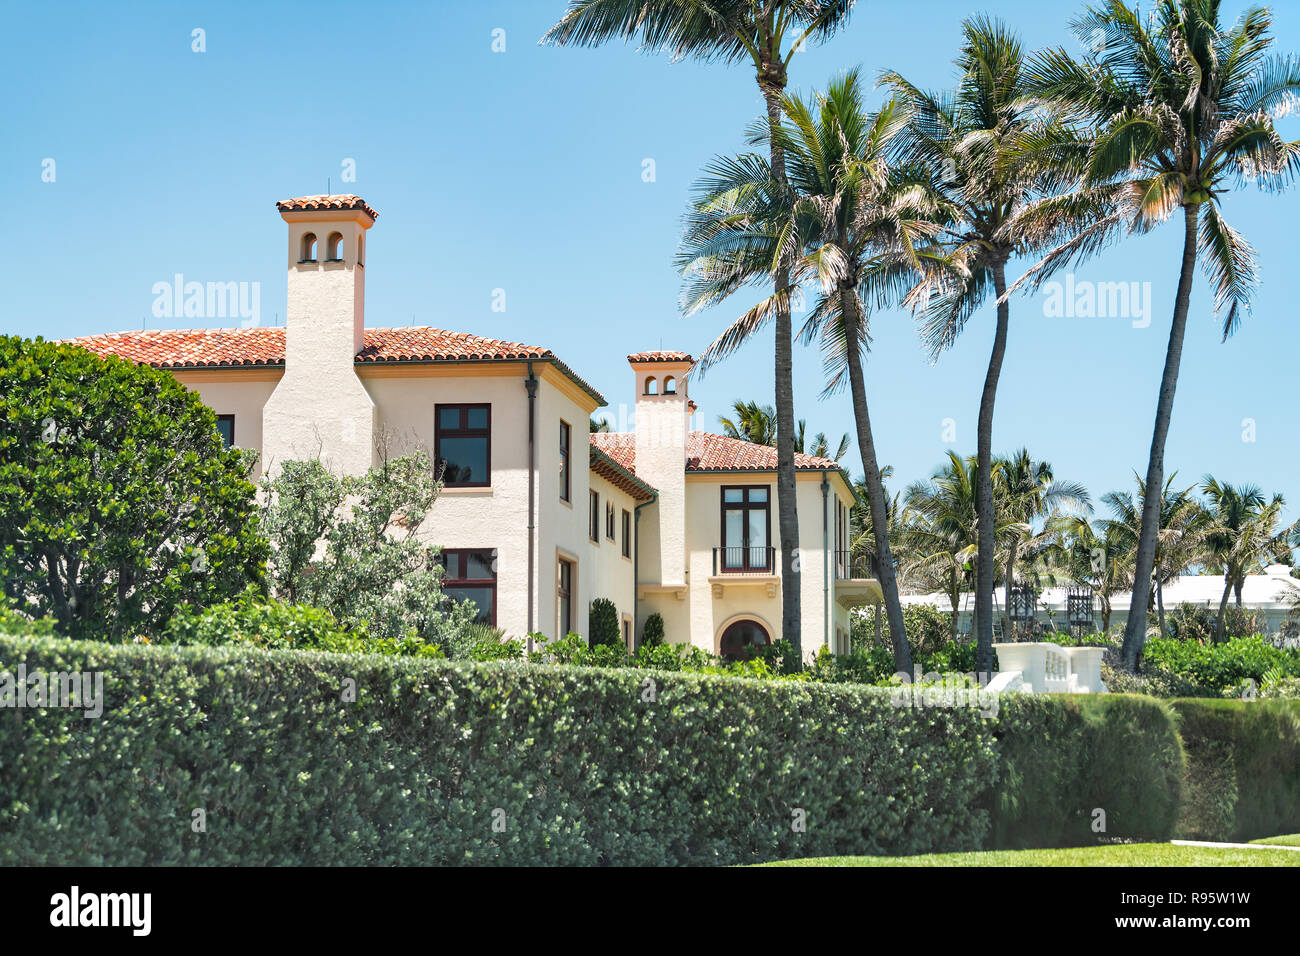 Palm Beach, USA - May 9, 2018: Mar-a-lago, presidential residence of Donald J Trump, American president in Florida with resort red tiled building with Stock Photo